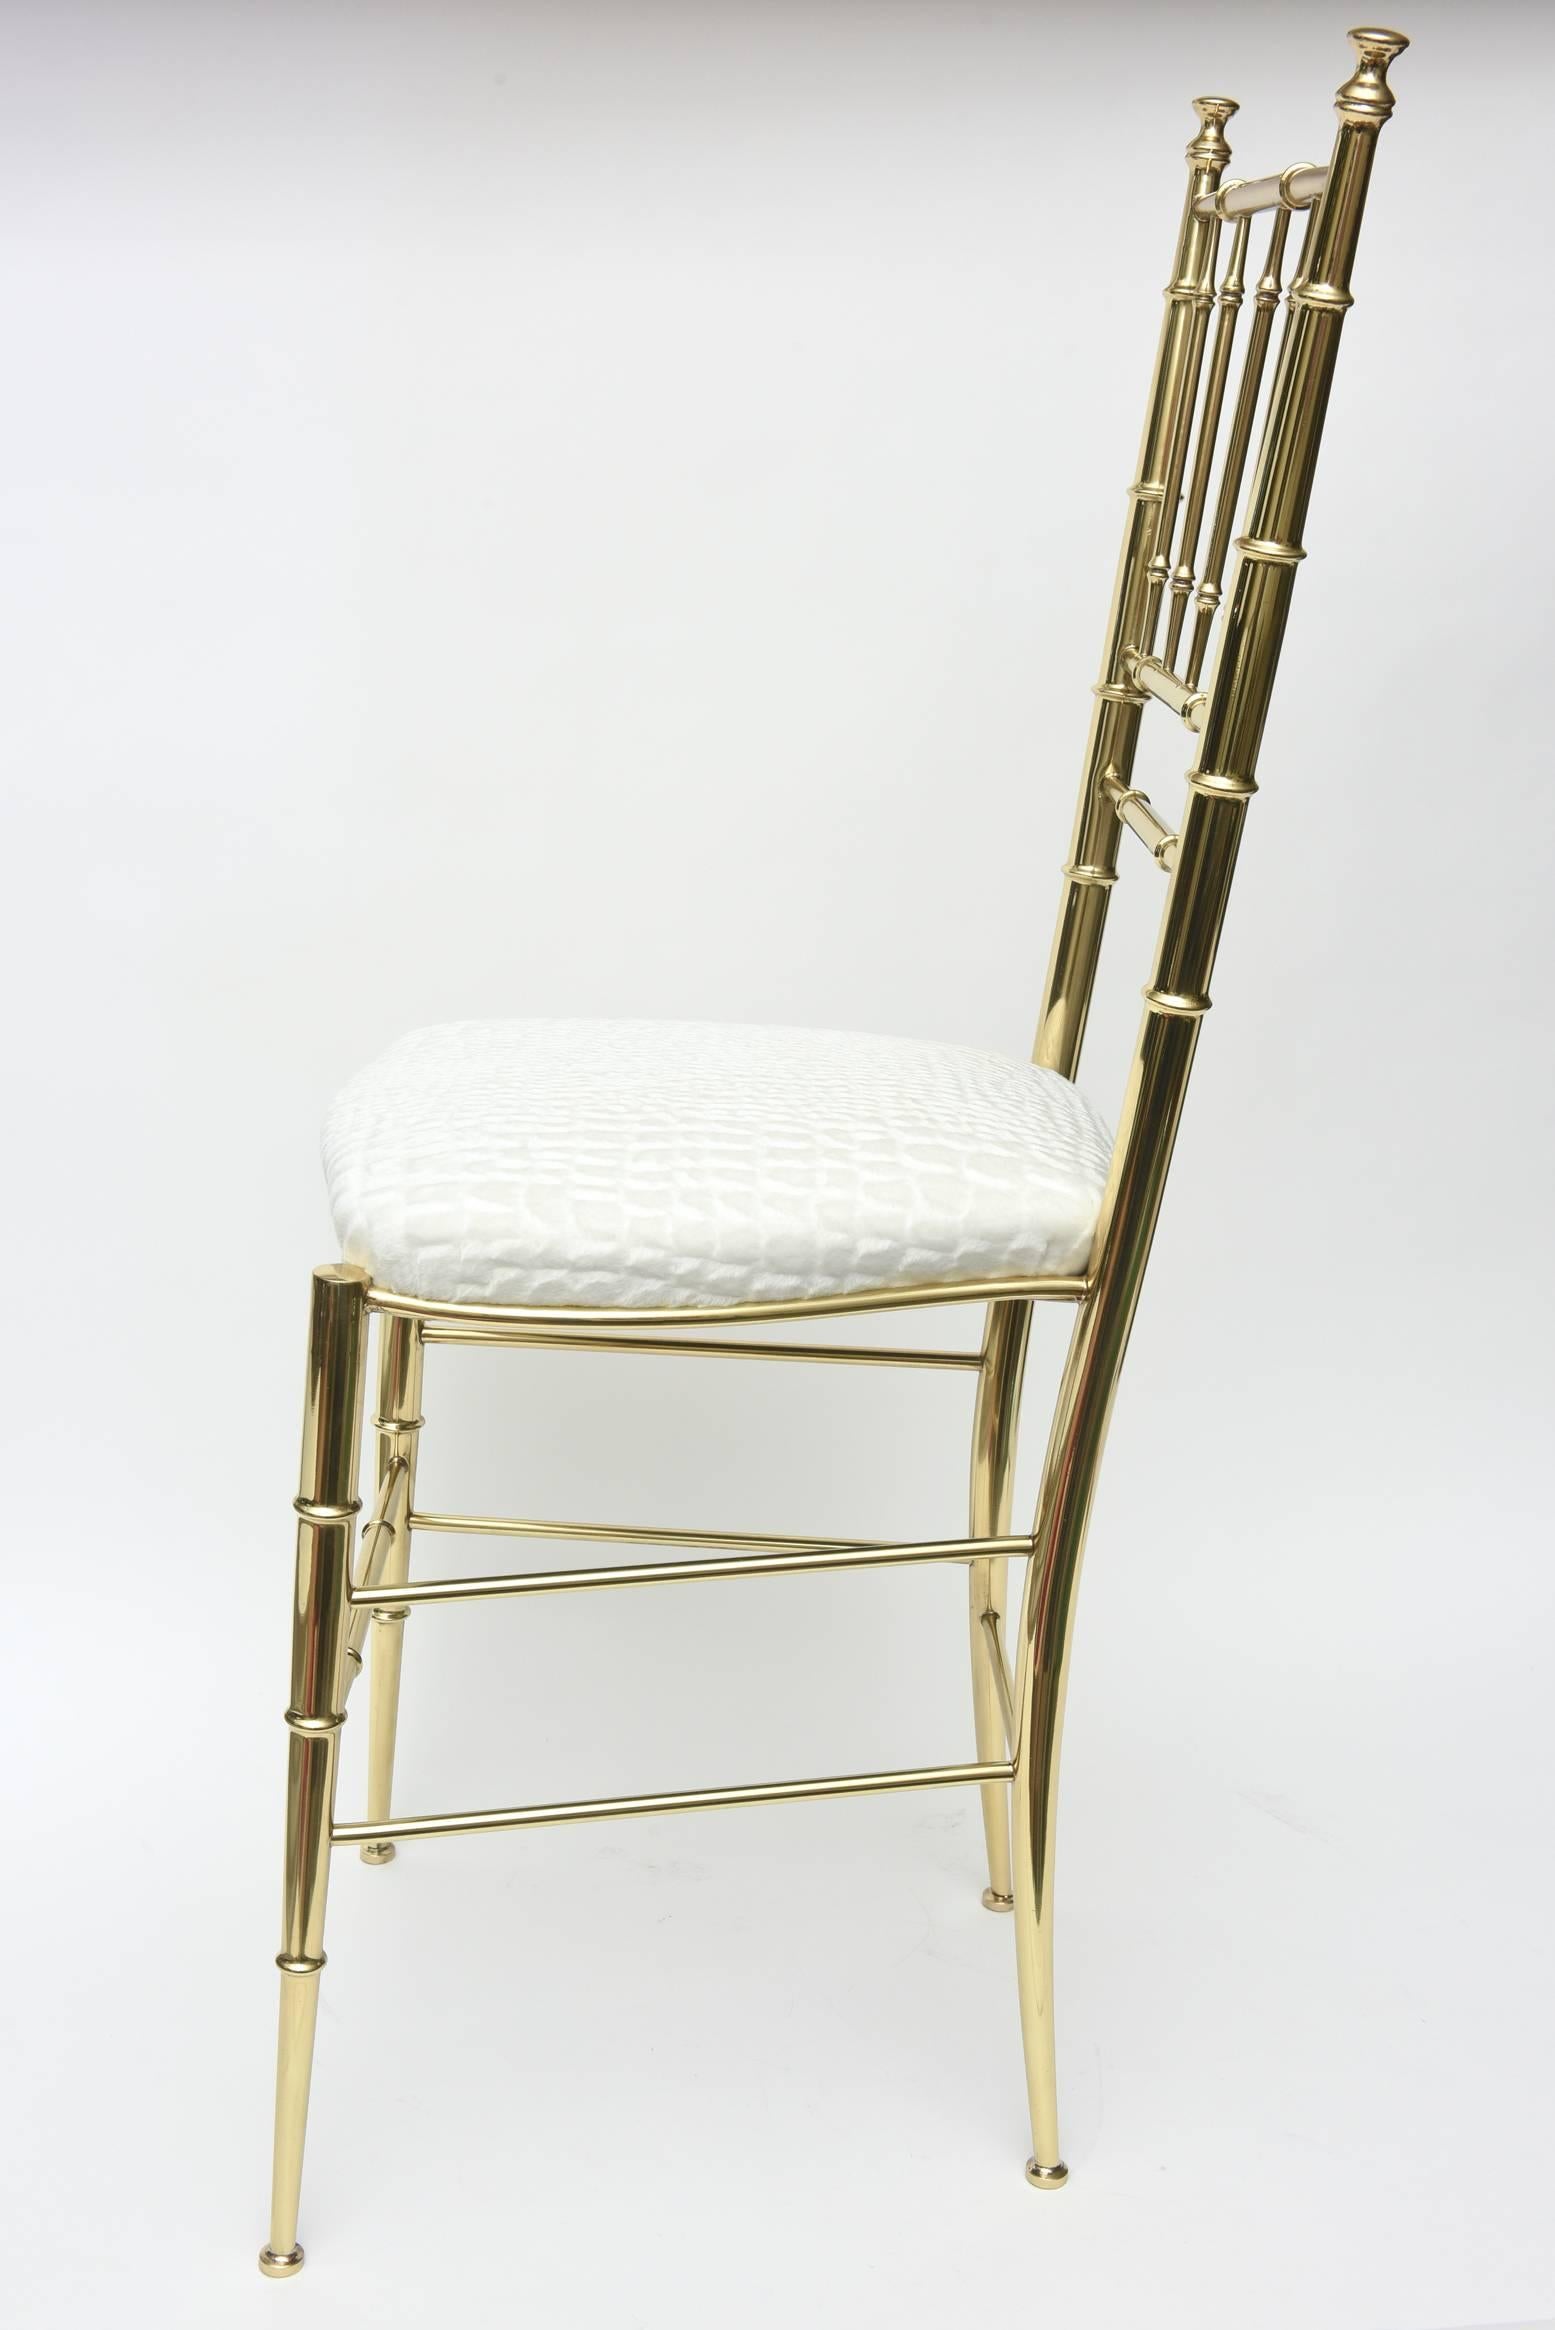 Mid-20th Century Chiavari Faux Bamboo Brass and Upholstered Side Chair Italian Mid-Century Modern For Sale